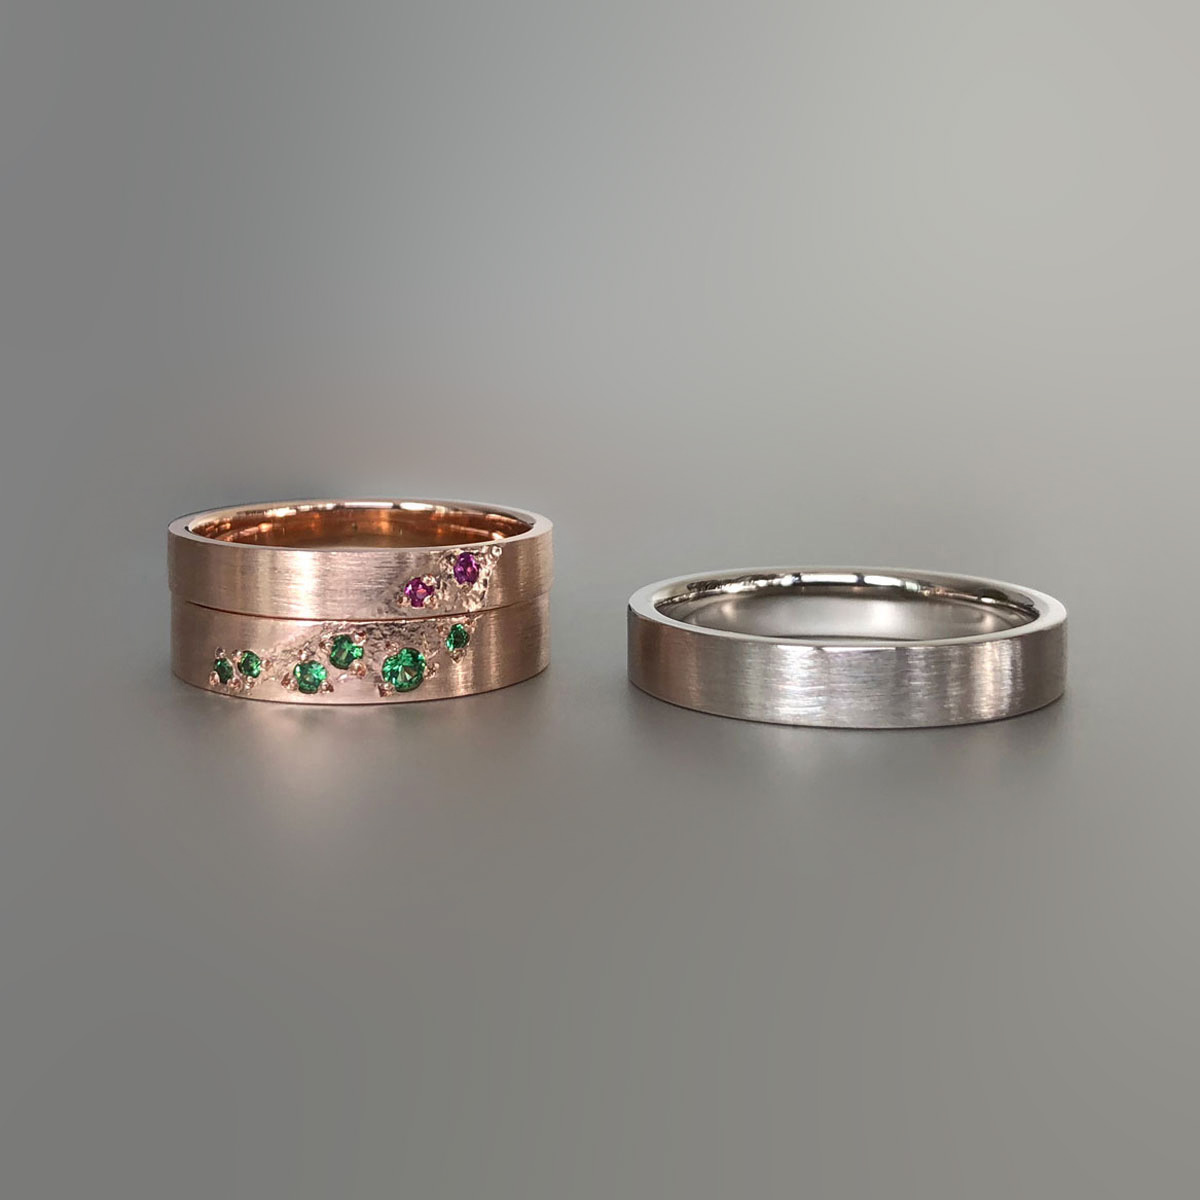 Rose gold and white gold rings with tsavorite garnets and pink sapphires